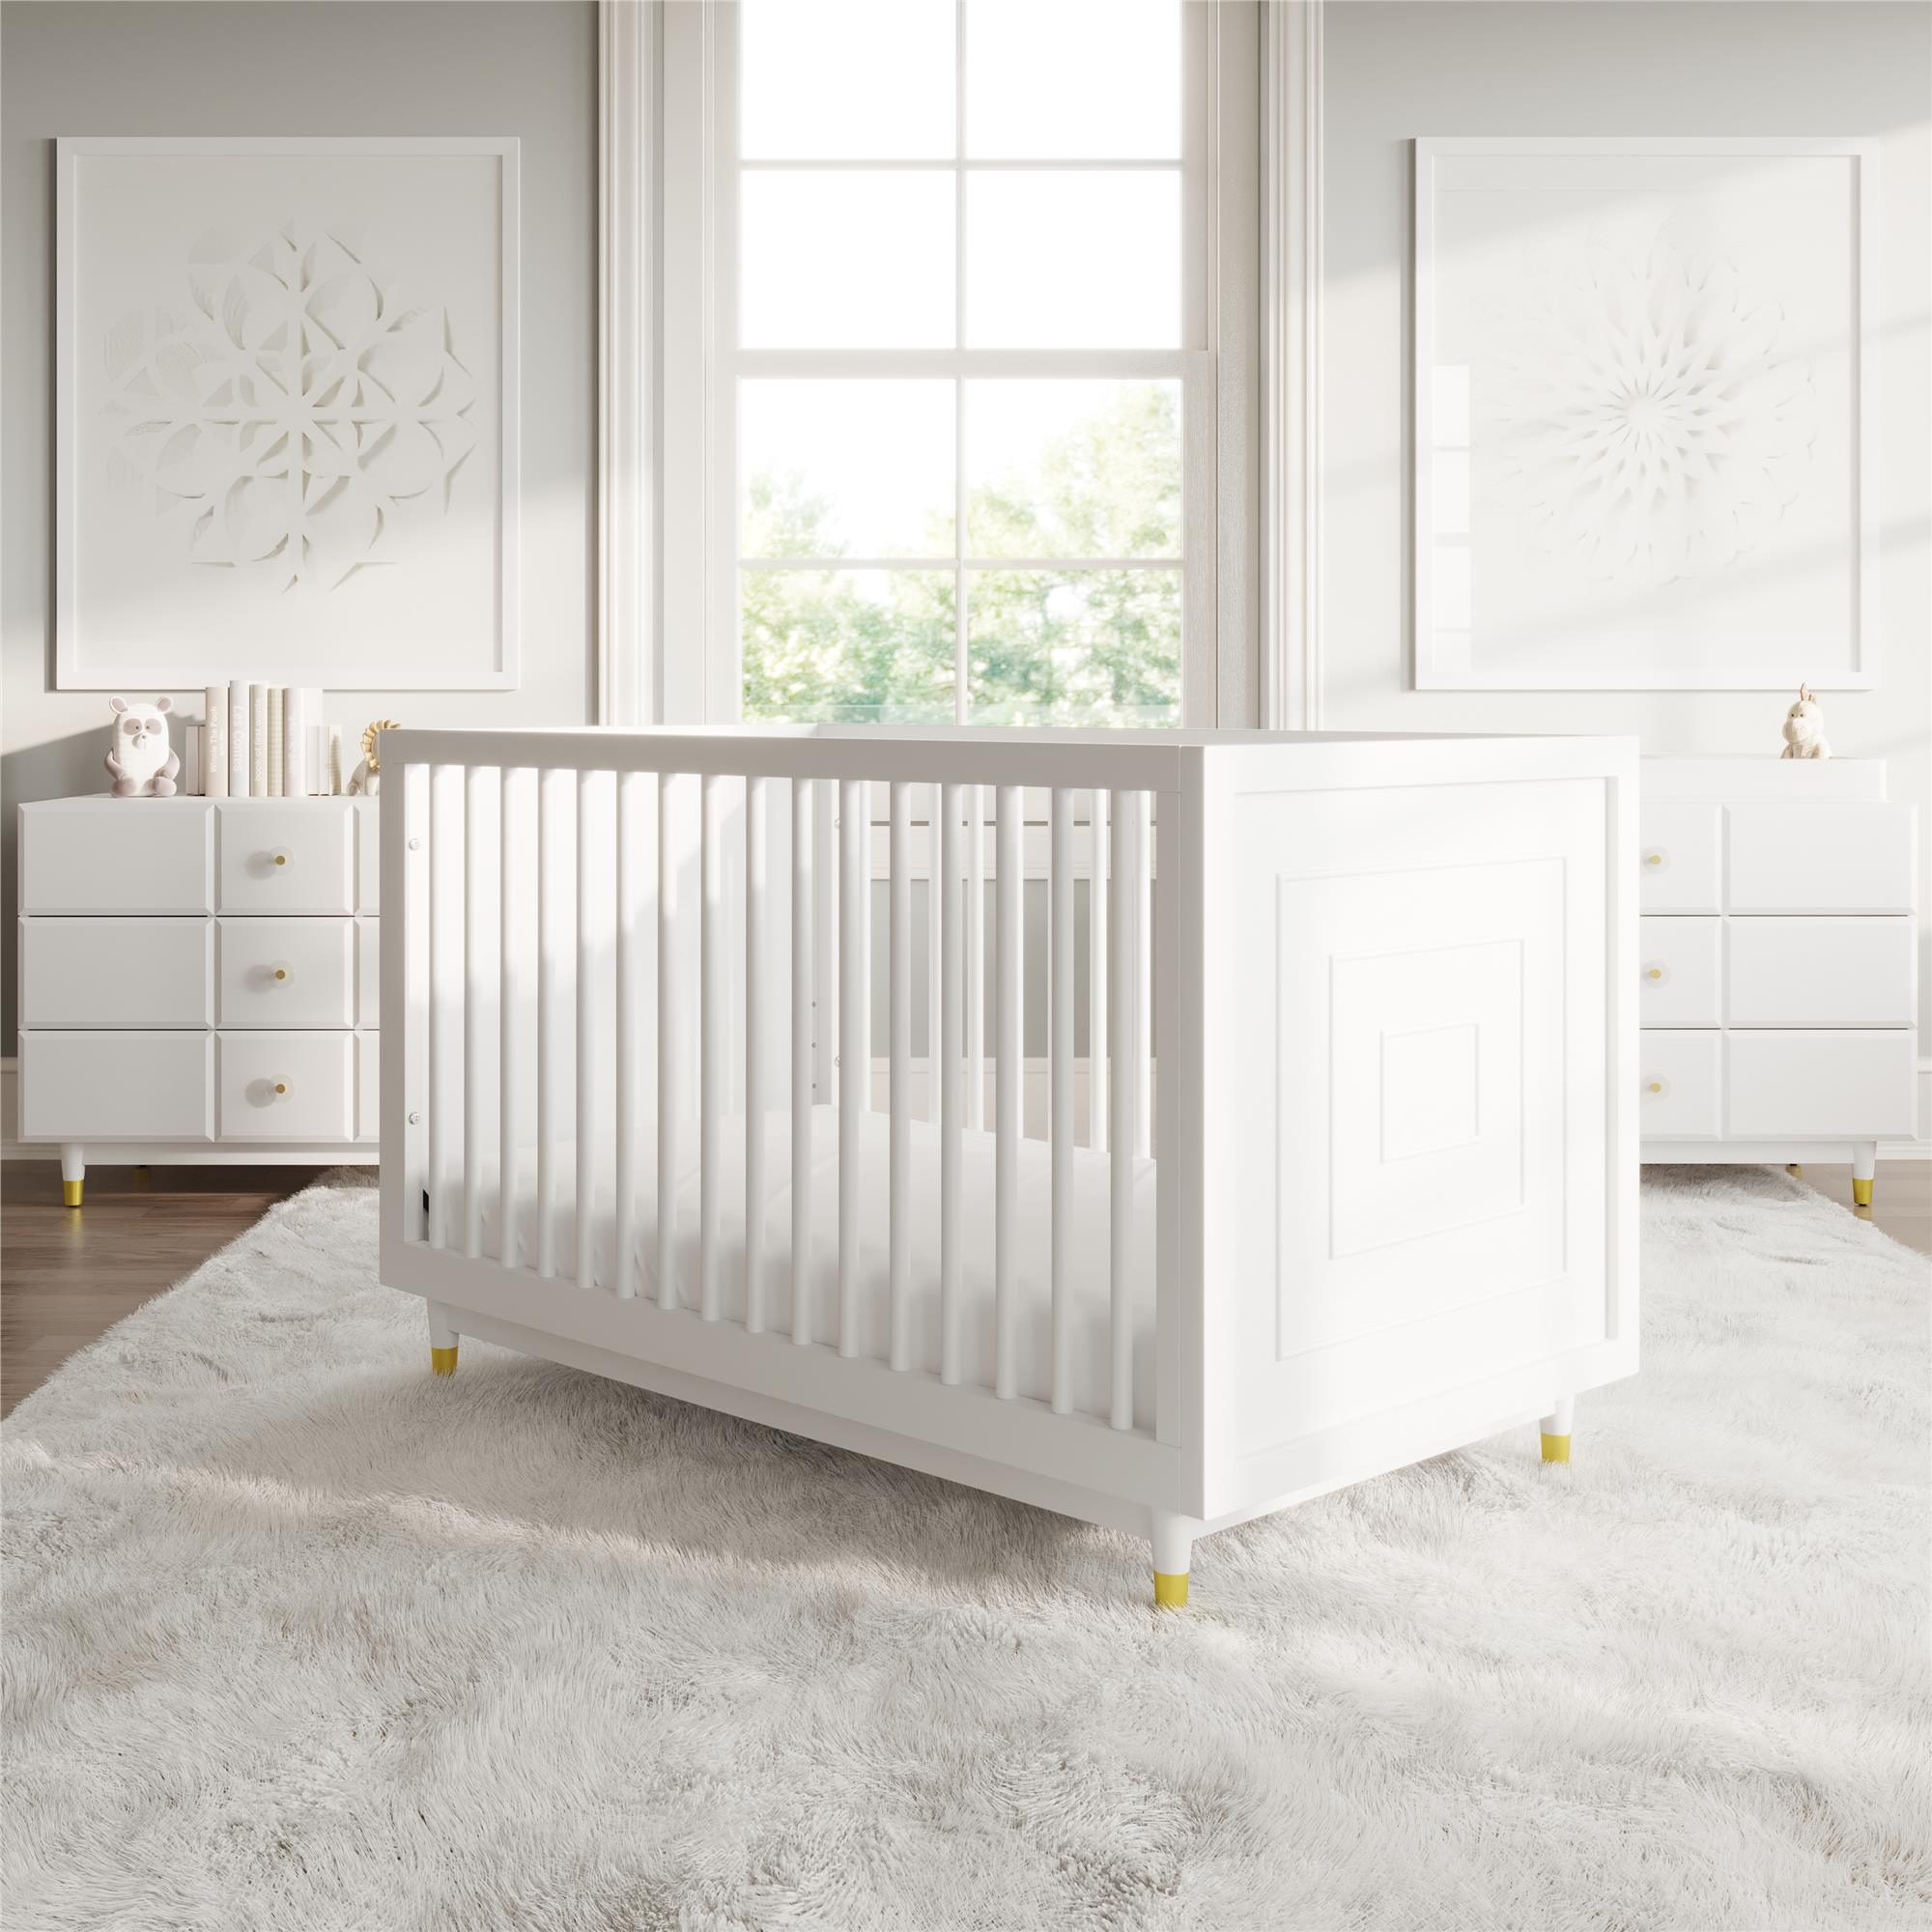 Little Seeds Aviary 3-in-1 Crib with Adjustable Mattress Height, White - image 1 of 32